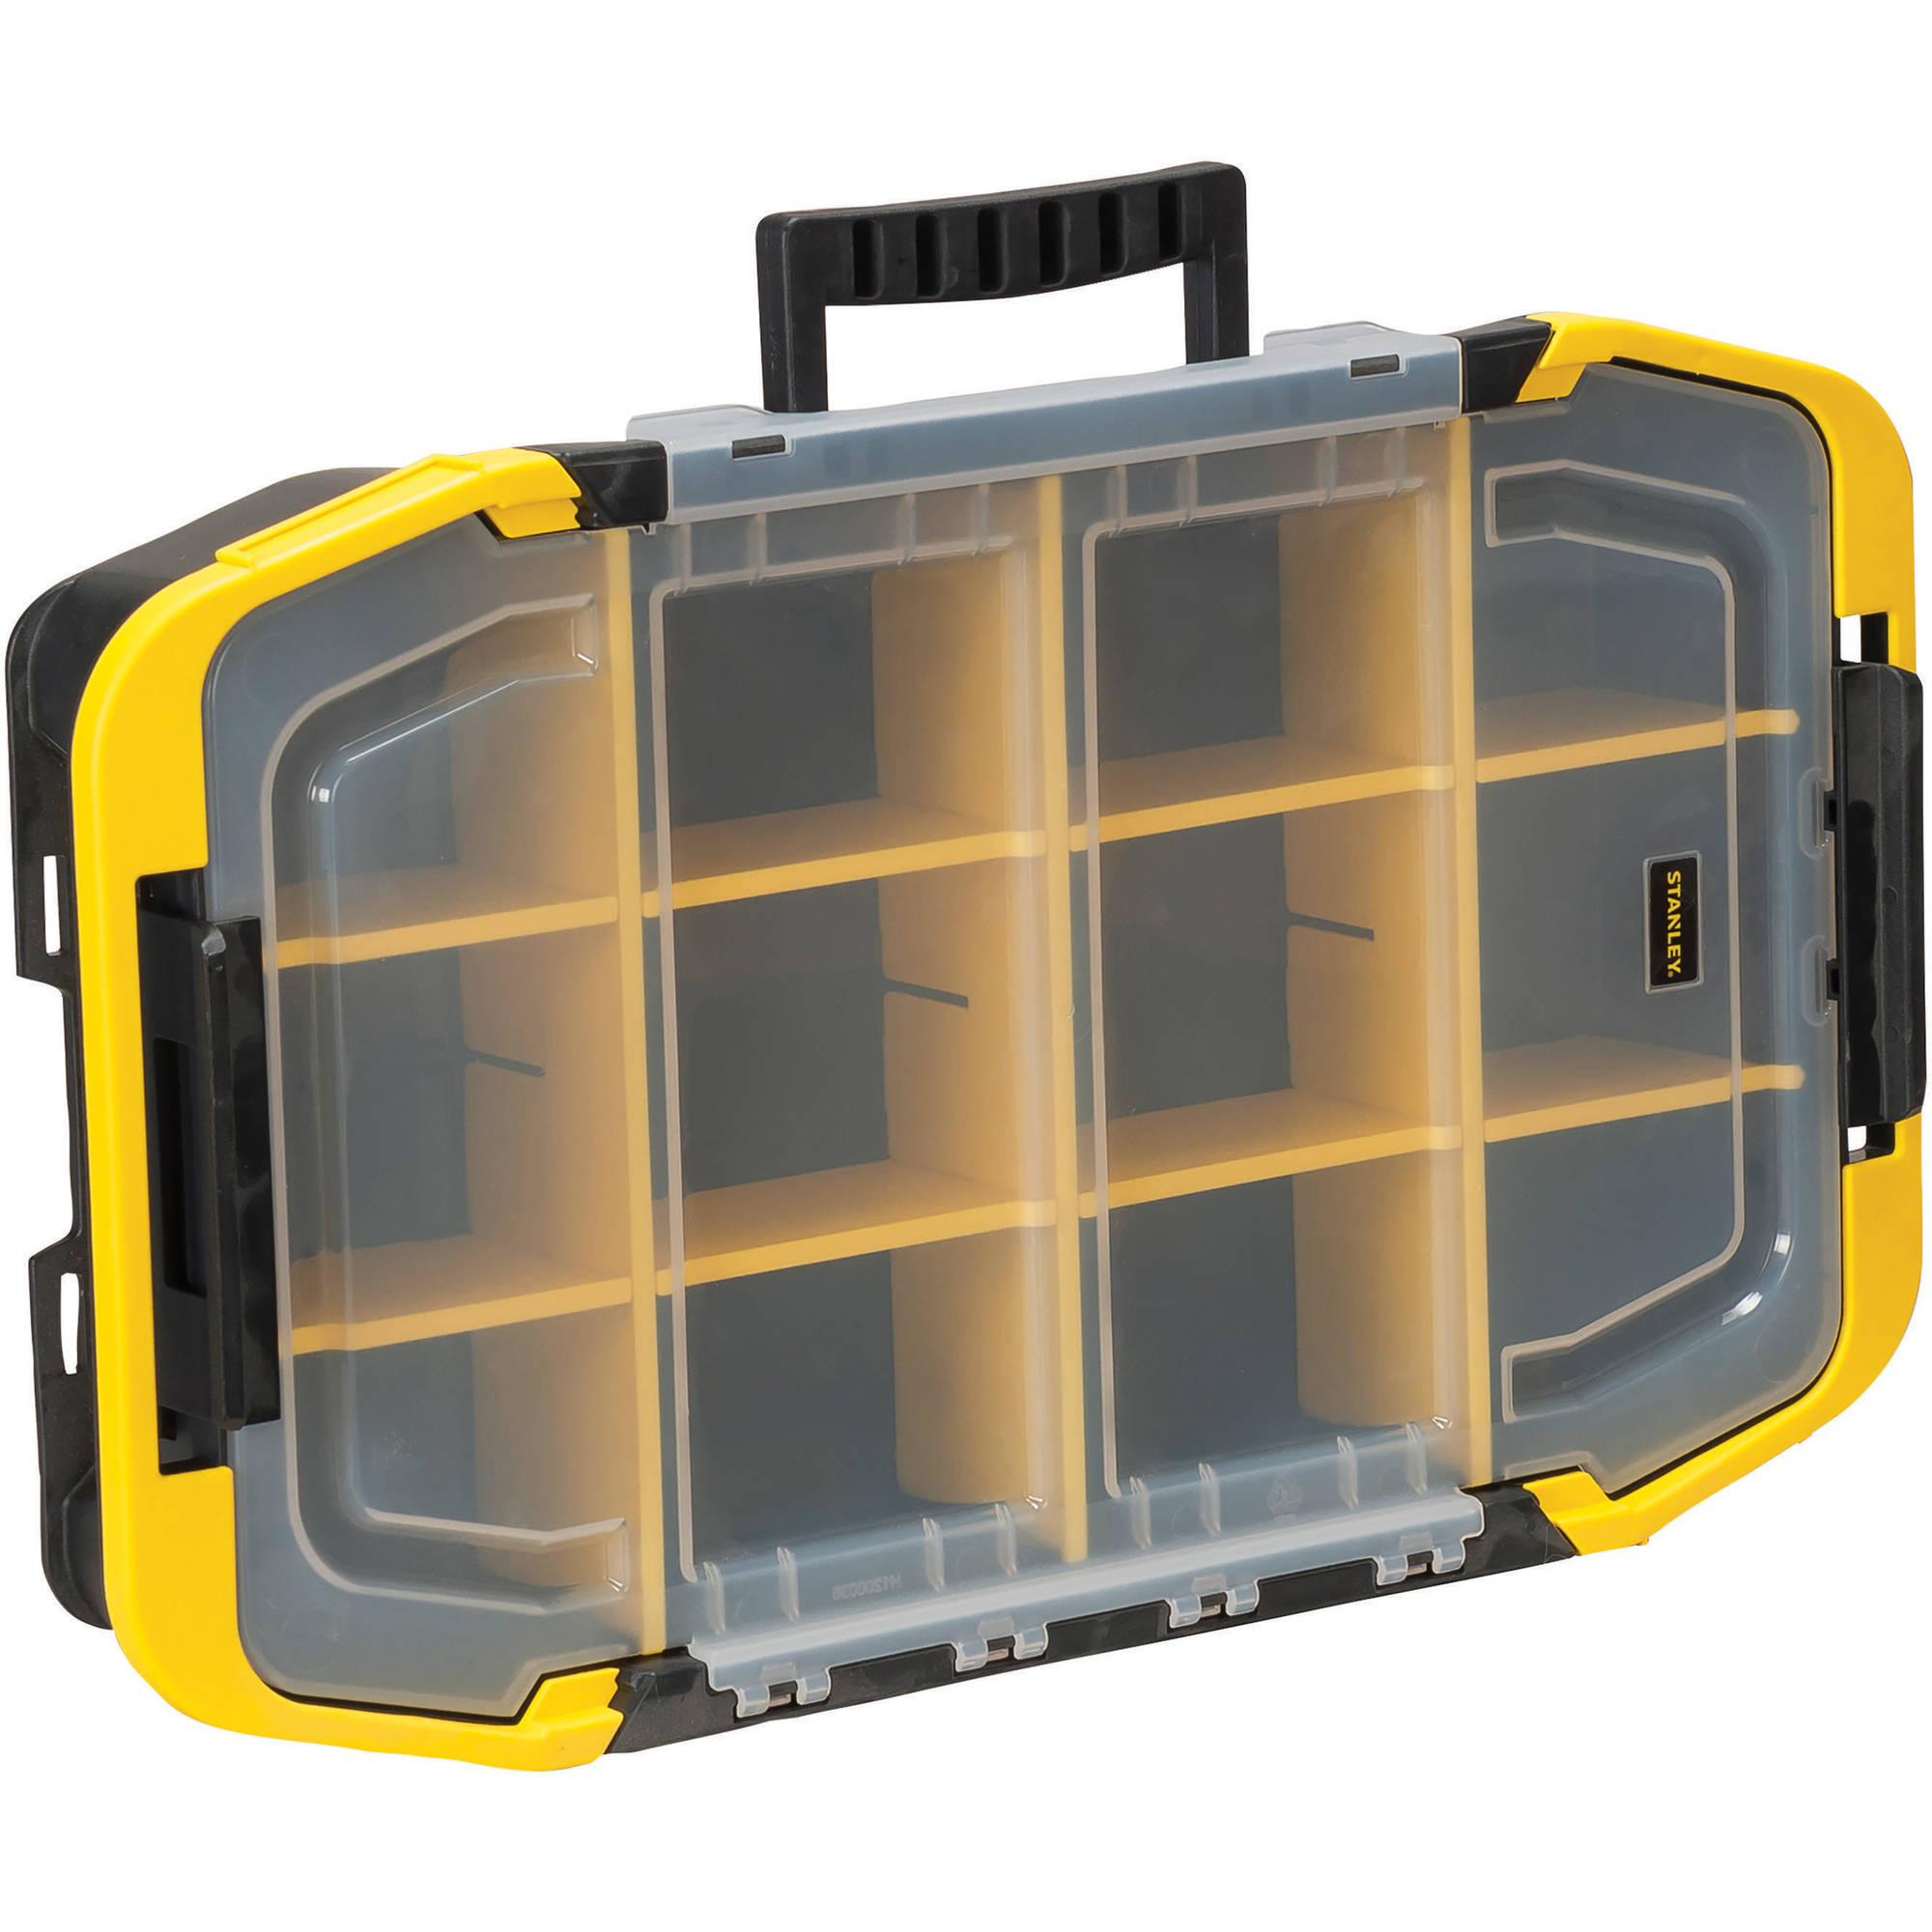 Stanley STST14440 Click-n-Connect Tool Organizer Tool Box - image 3 of 3